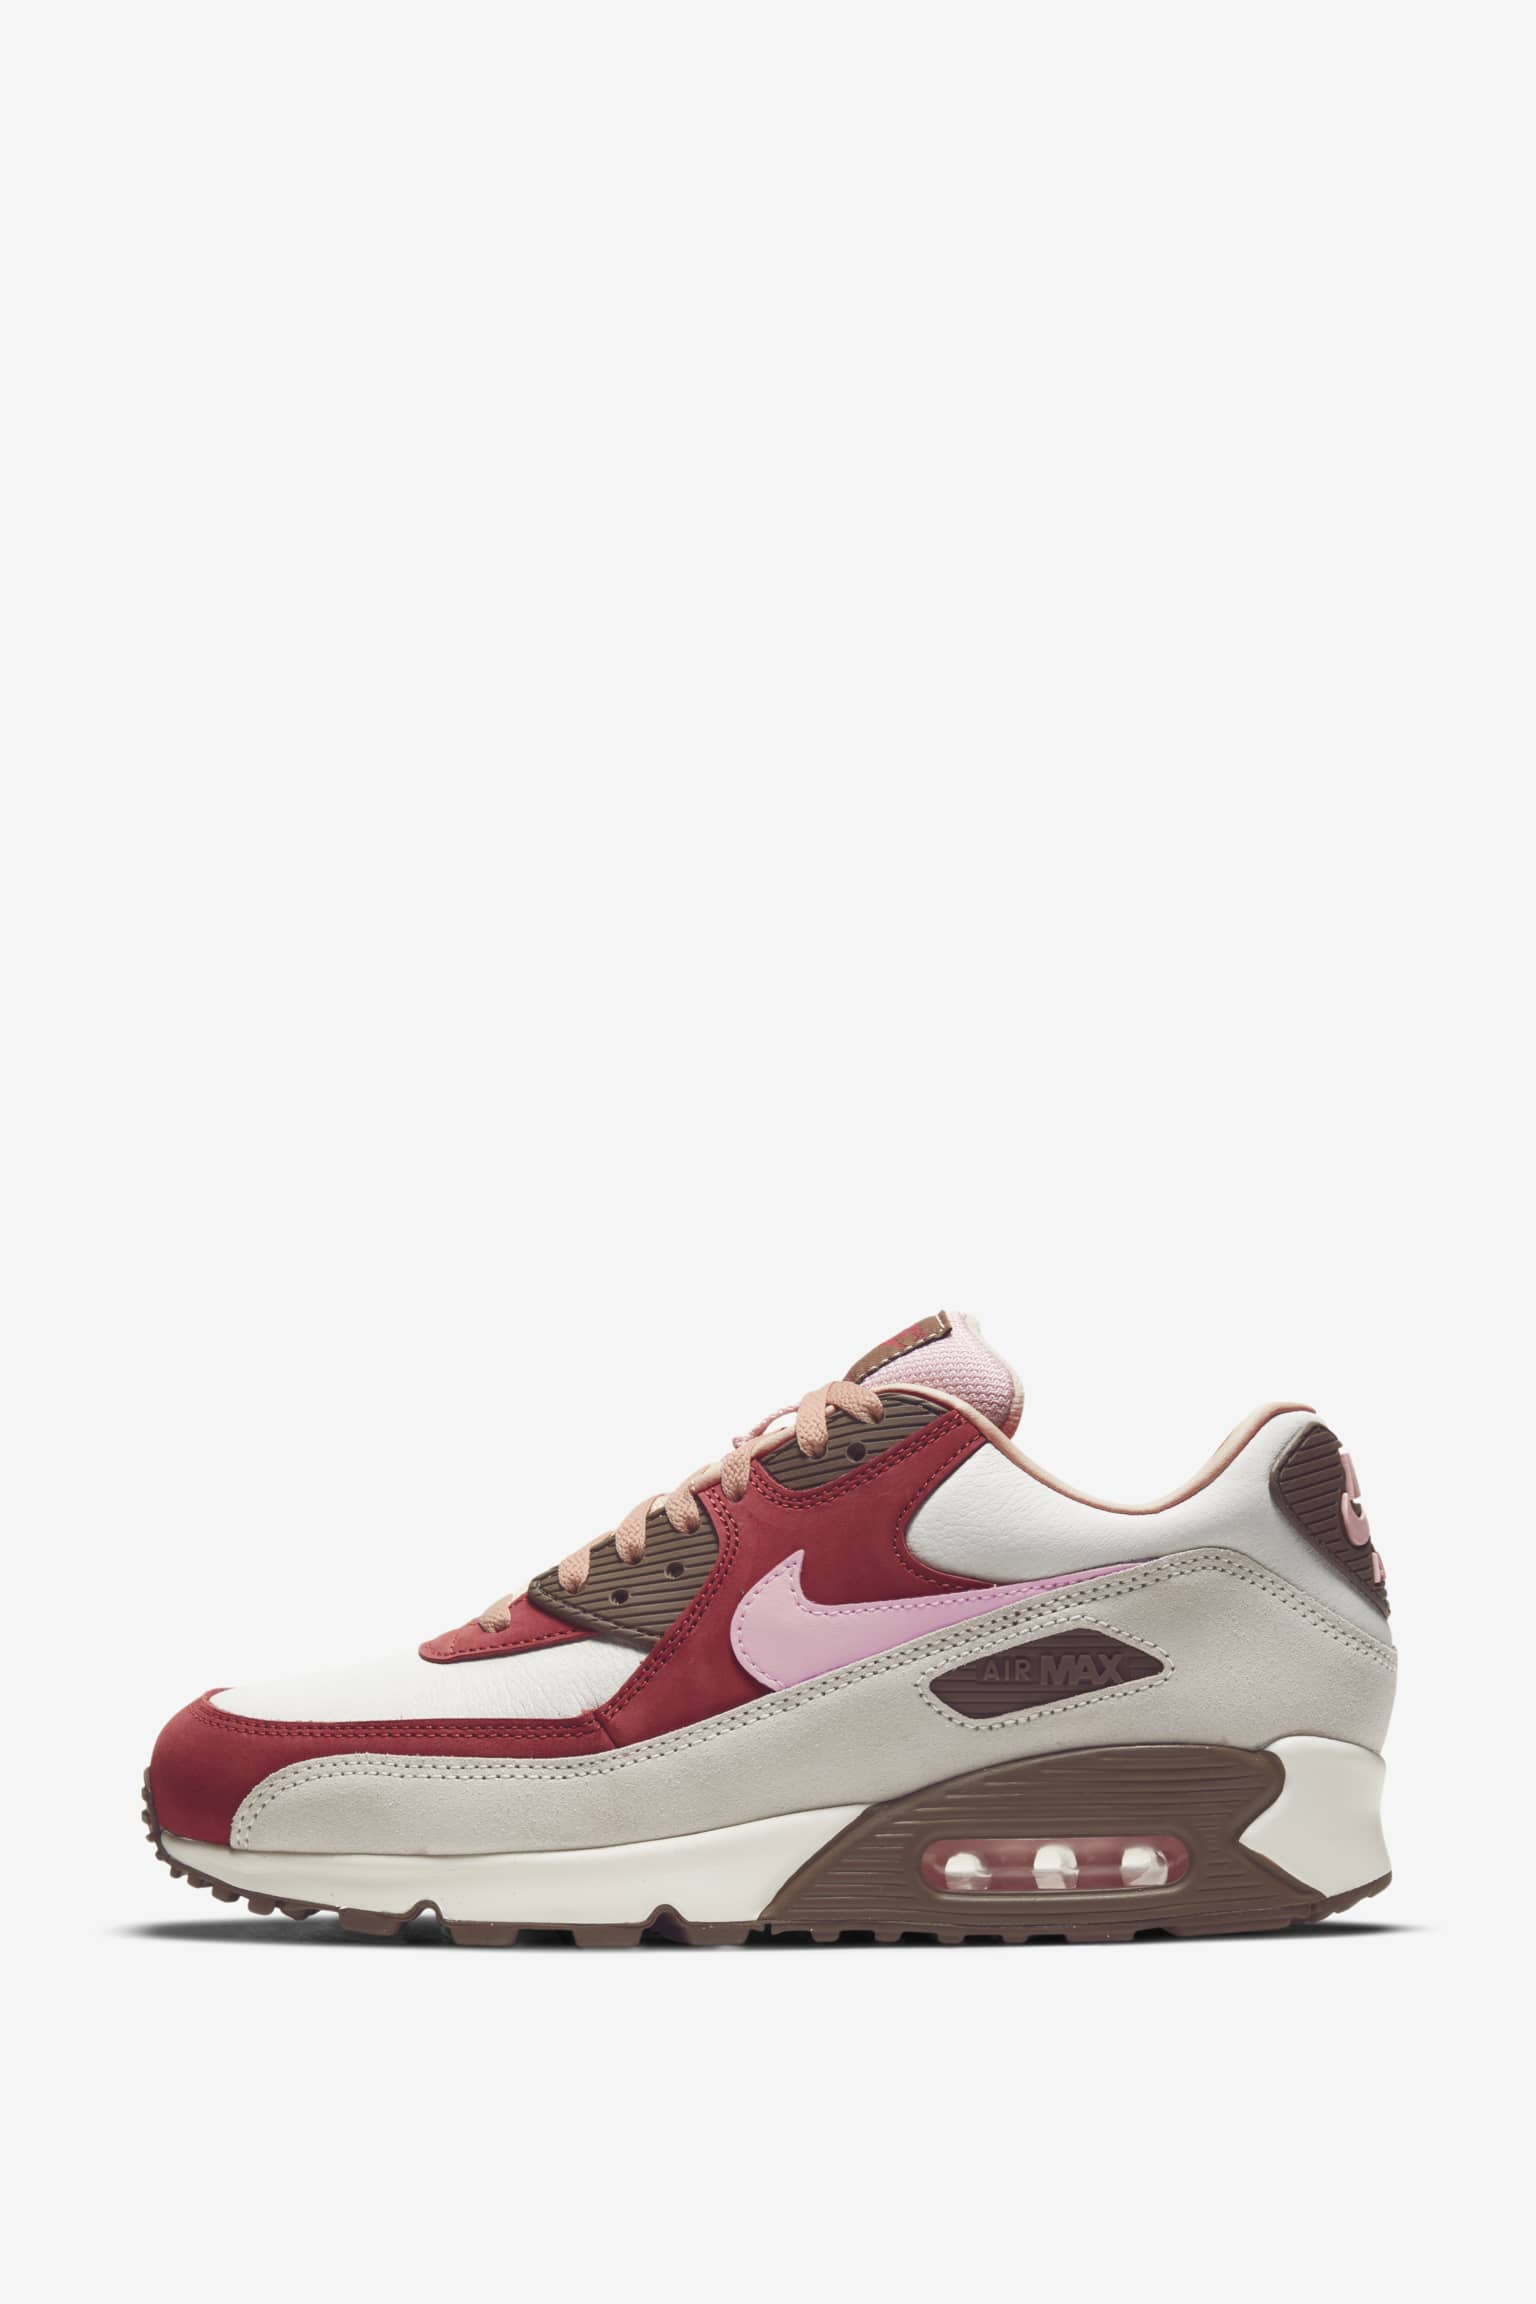 nike snkrs new releases